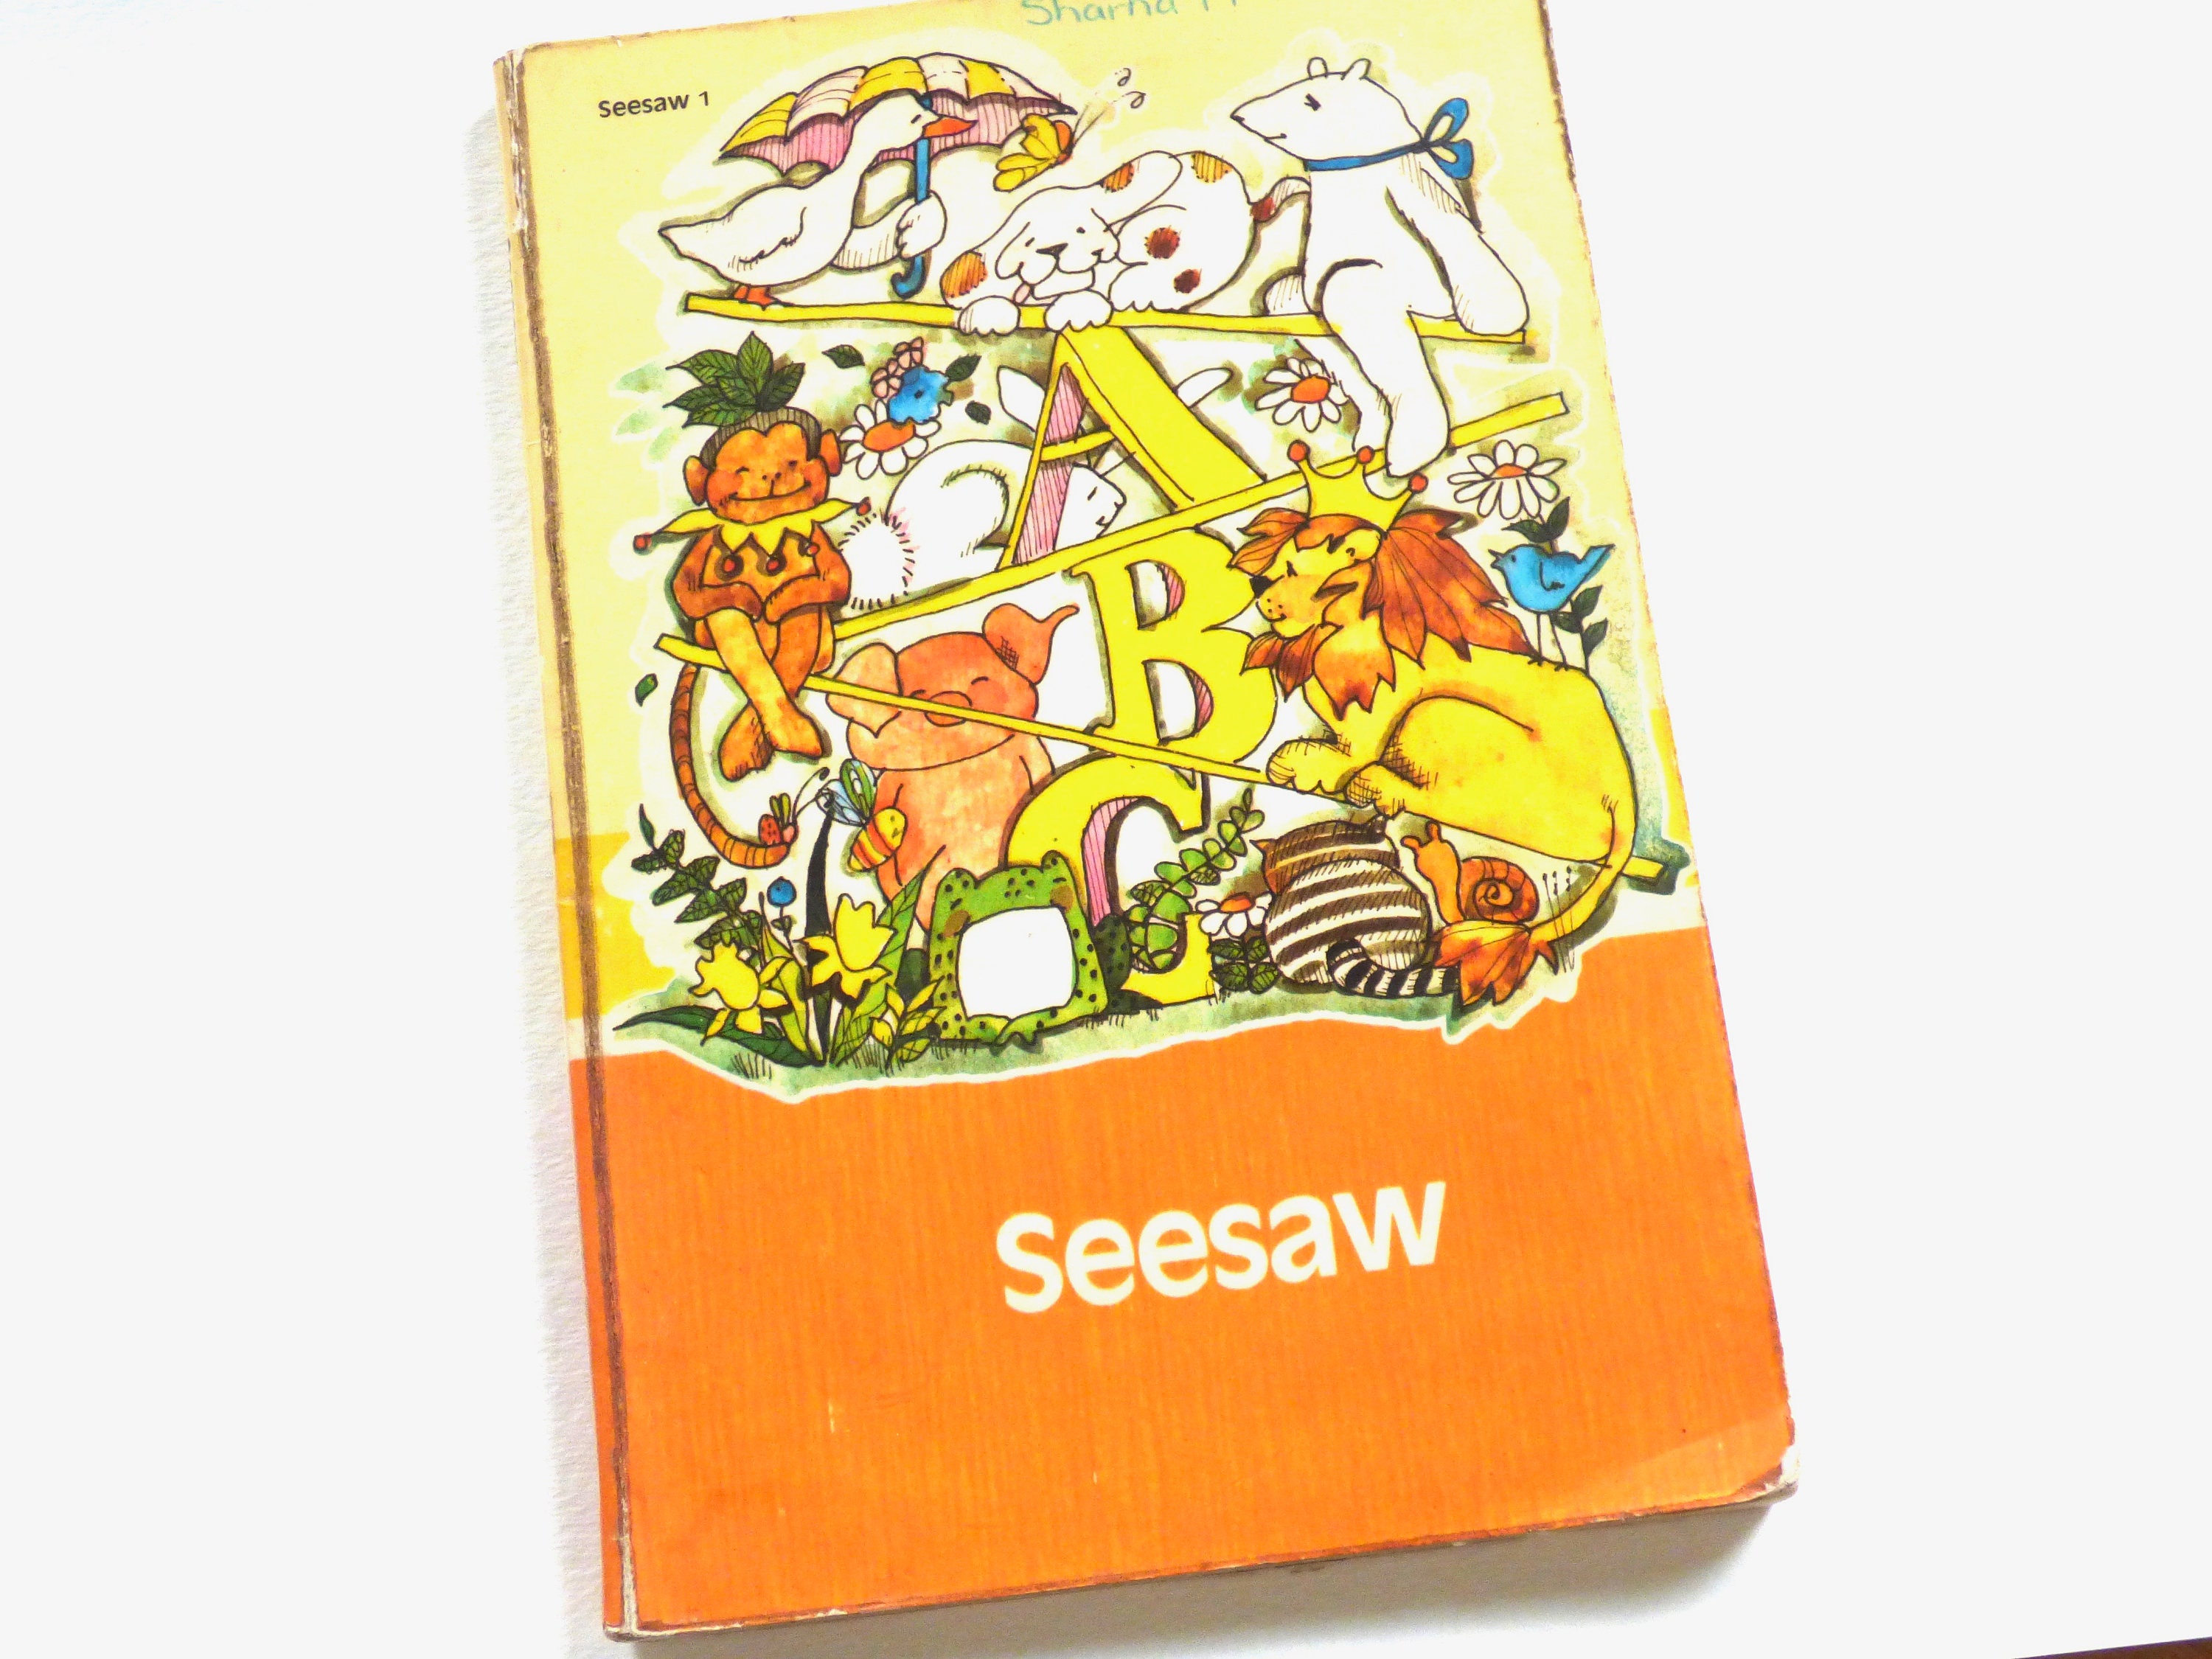 One　School　Etsy　Story　Book　Children's　Vintage　Seesaw　1960